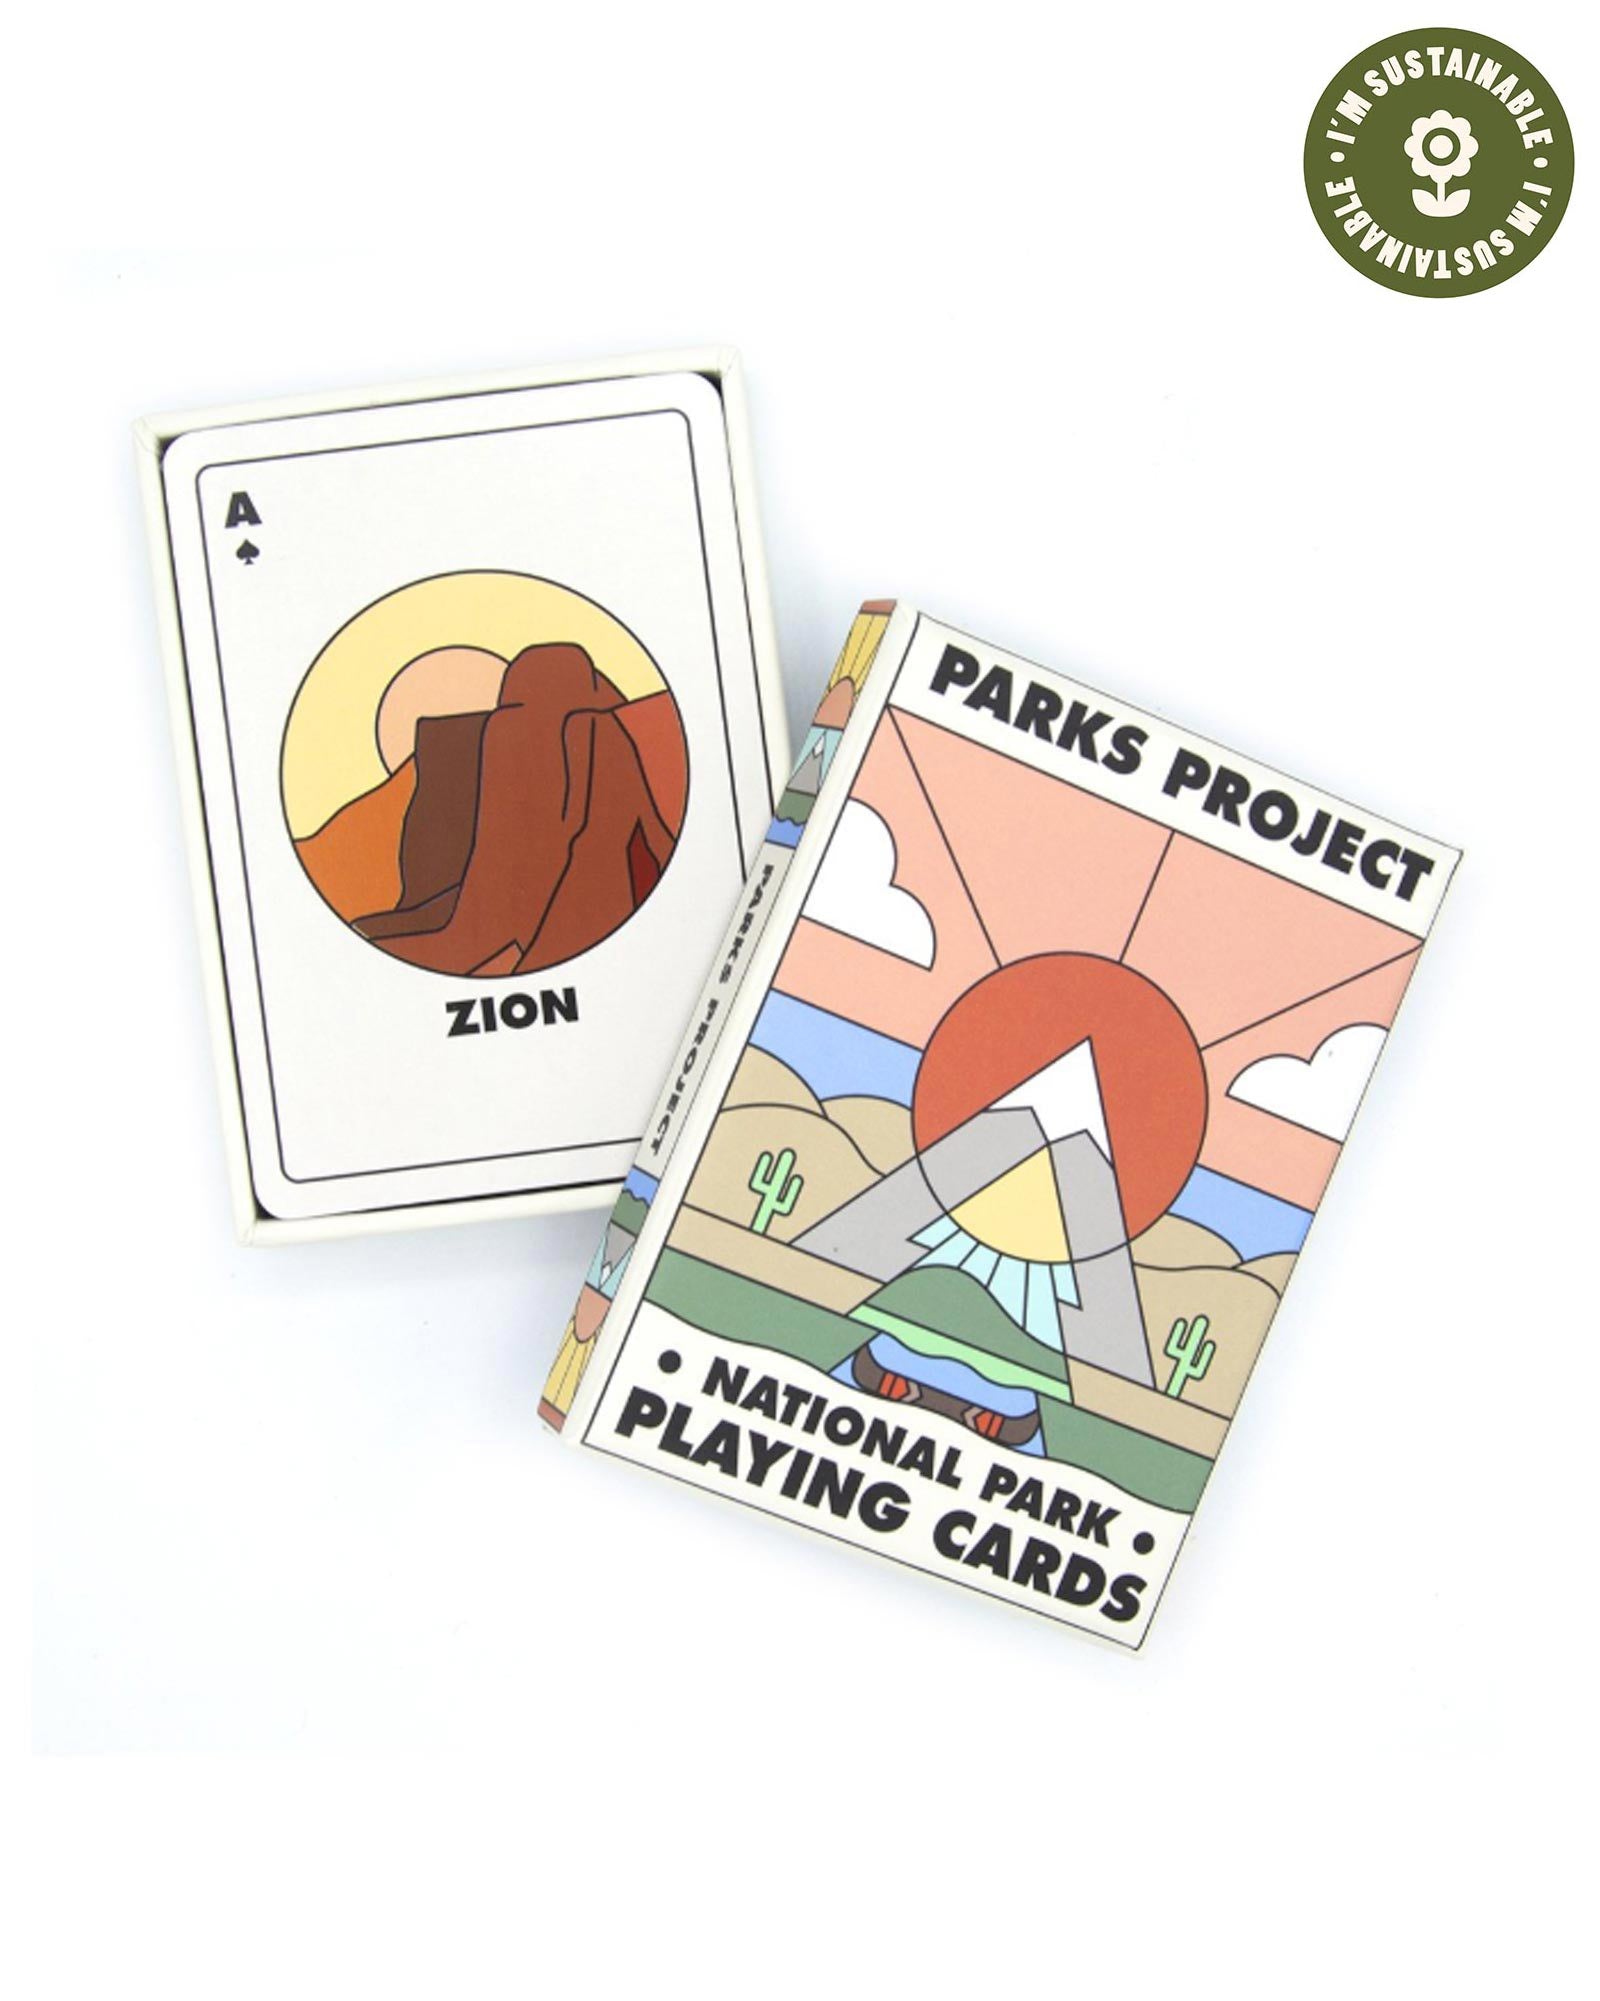 Shop Minimalist Playing Cards Inspired By Our National Parks – Parks Project